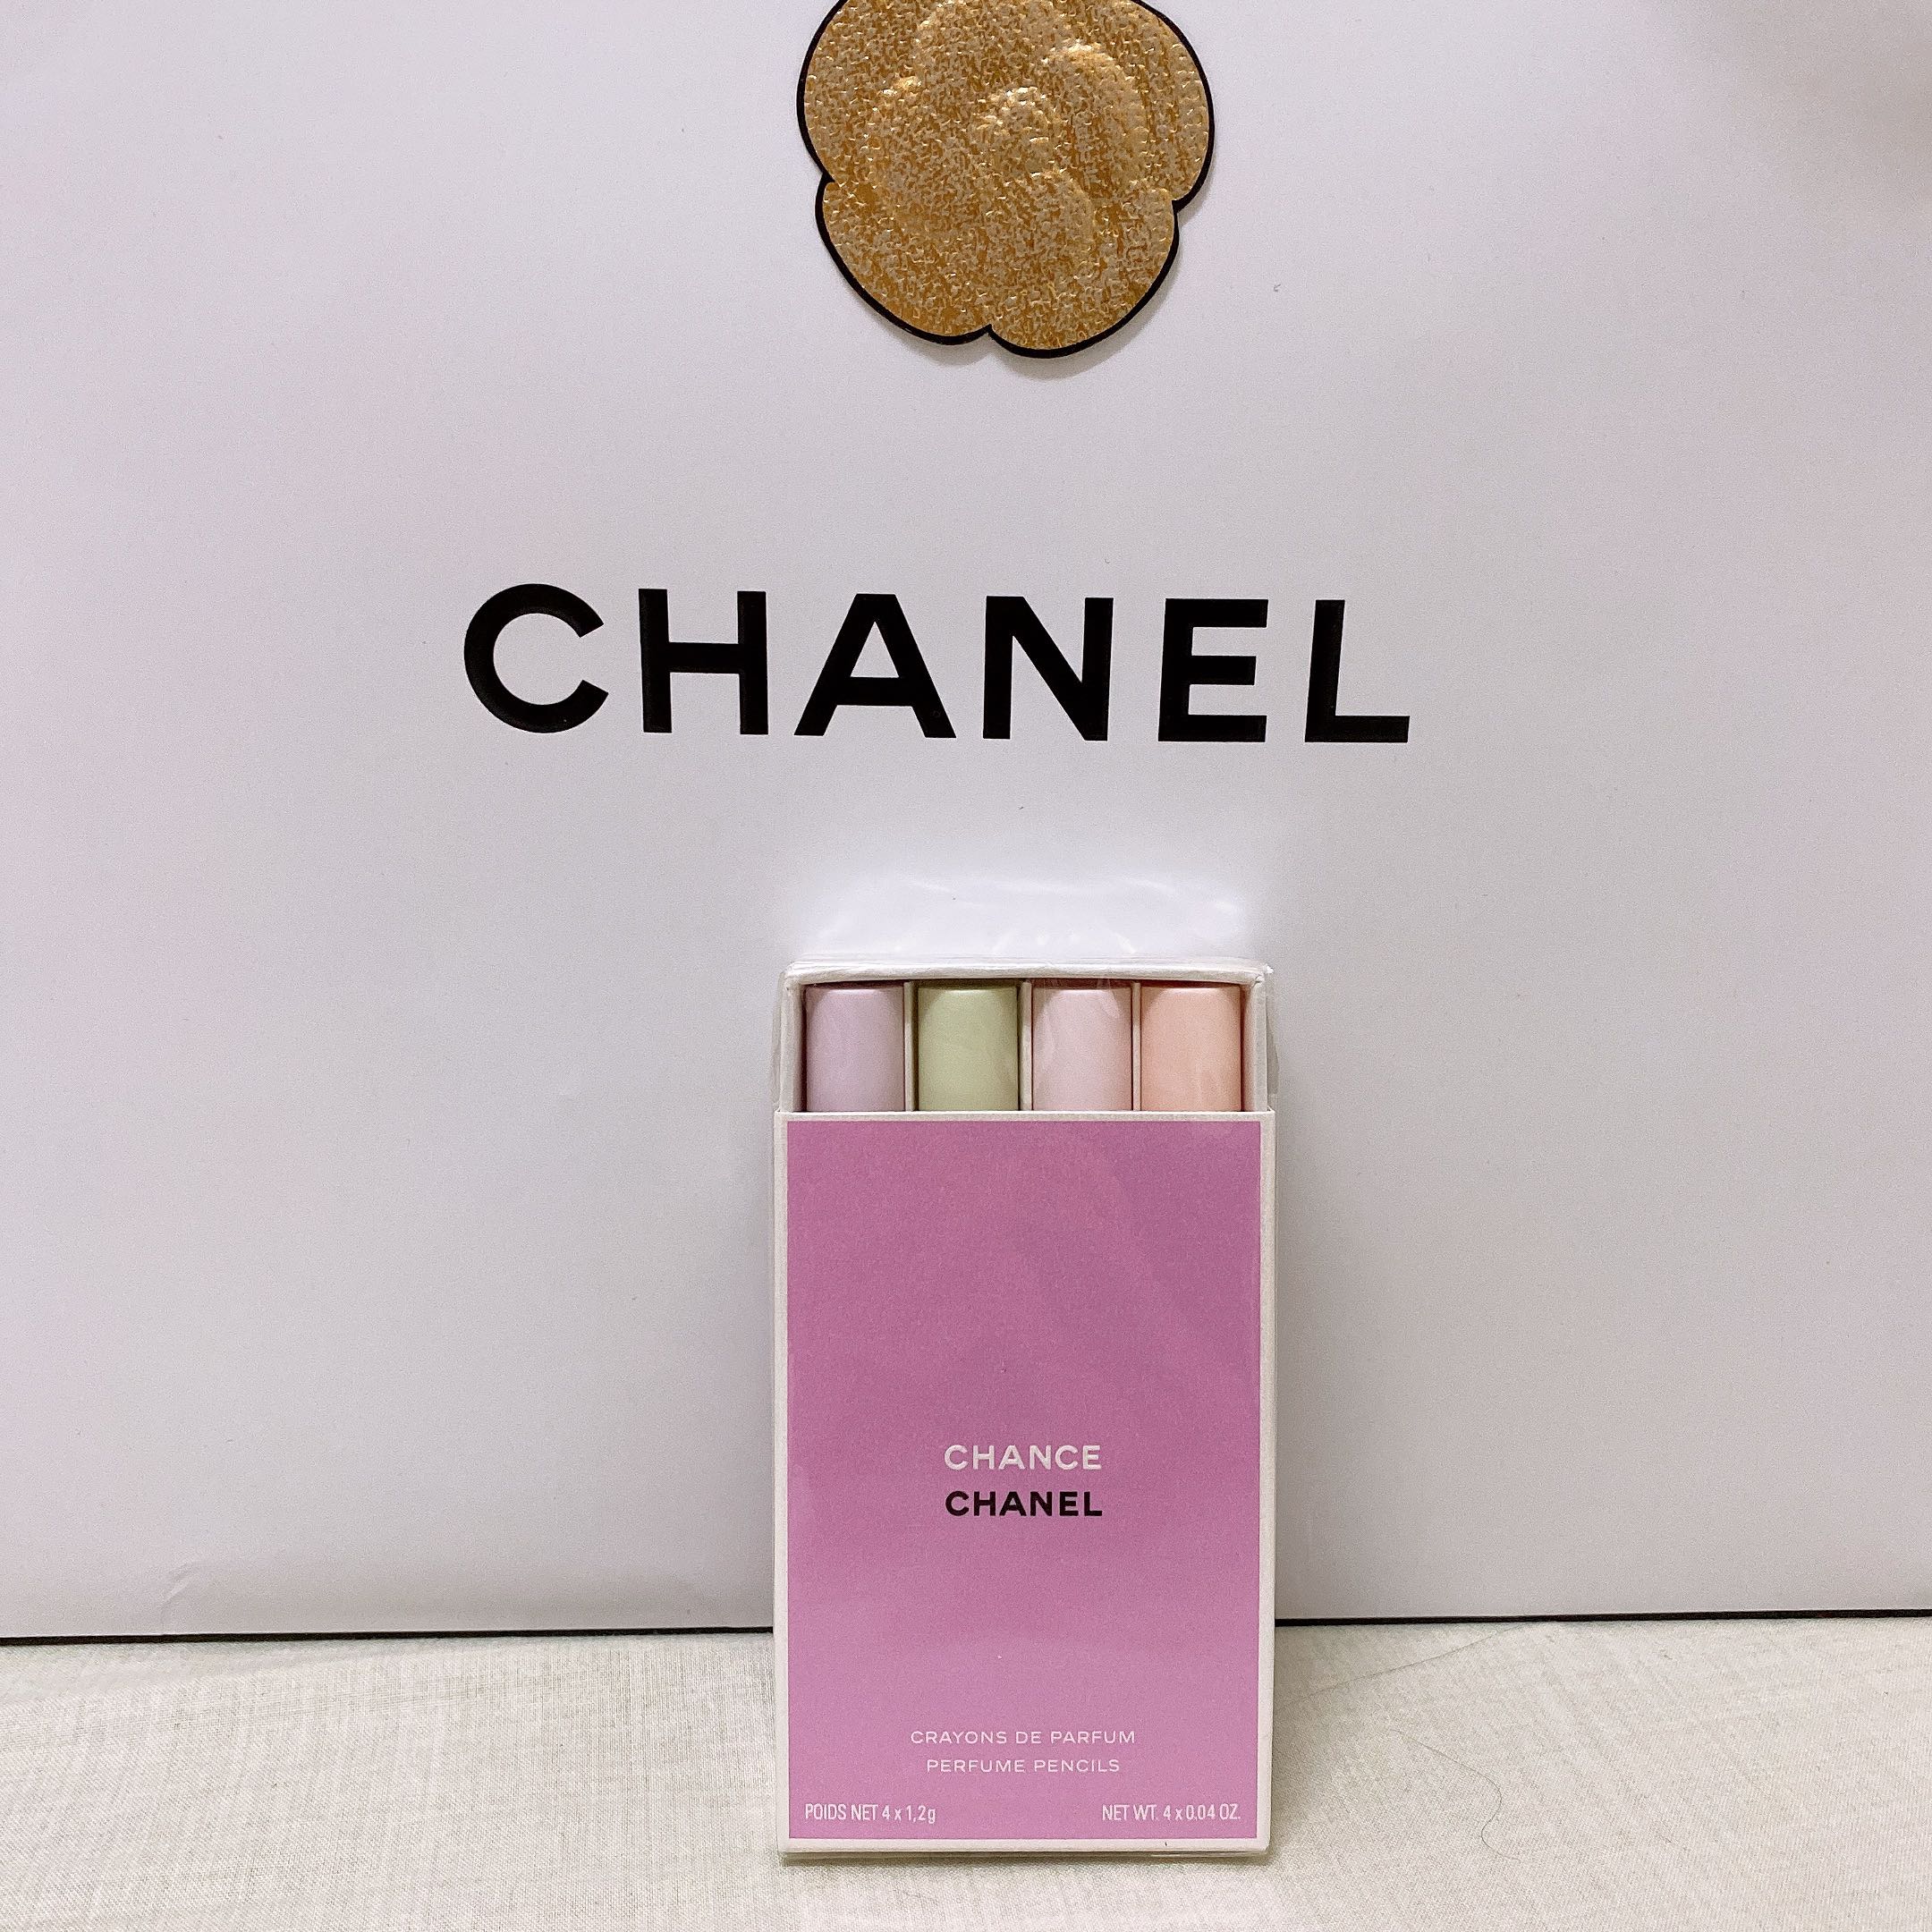 Chanel CHANCE Perfume Pencils Are Officially Here